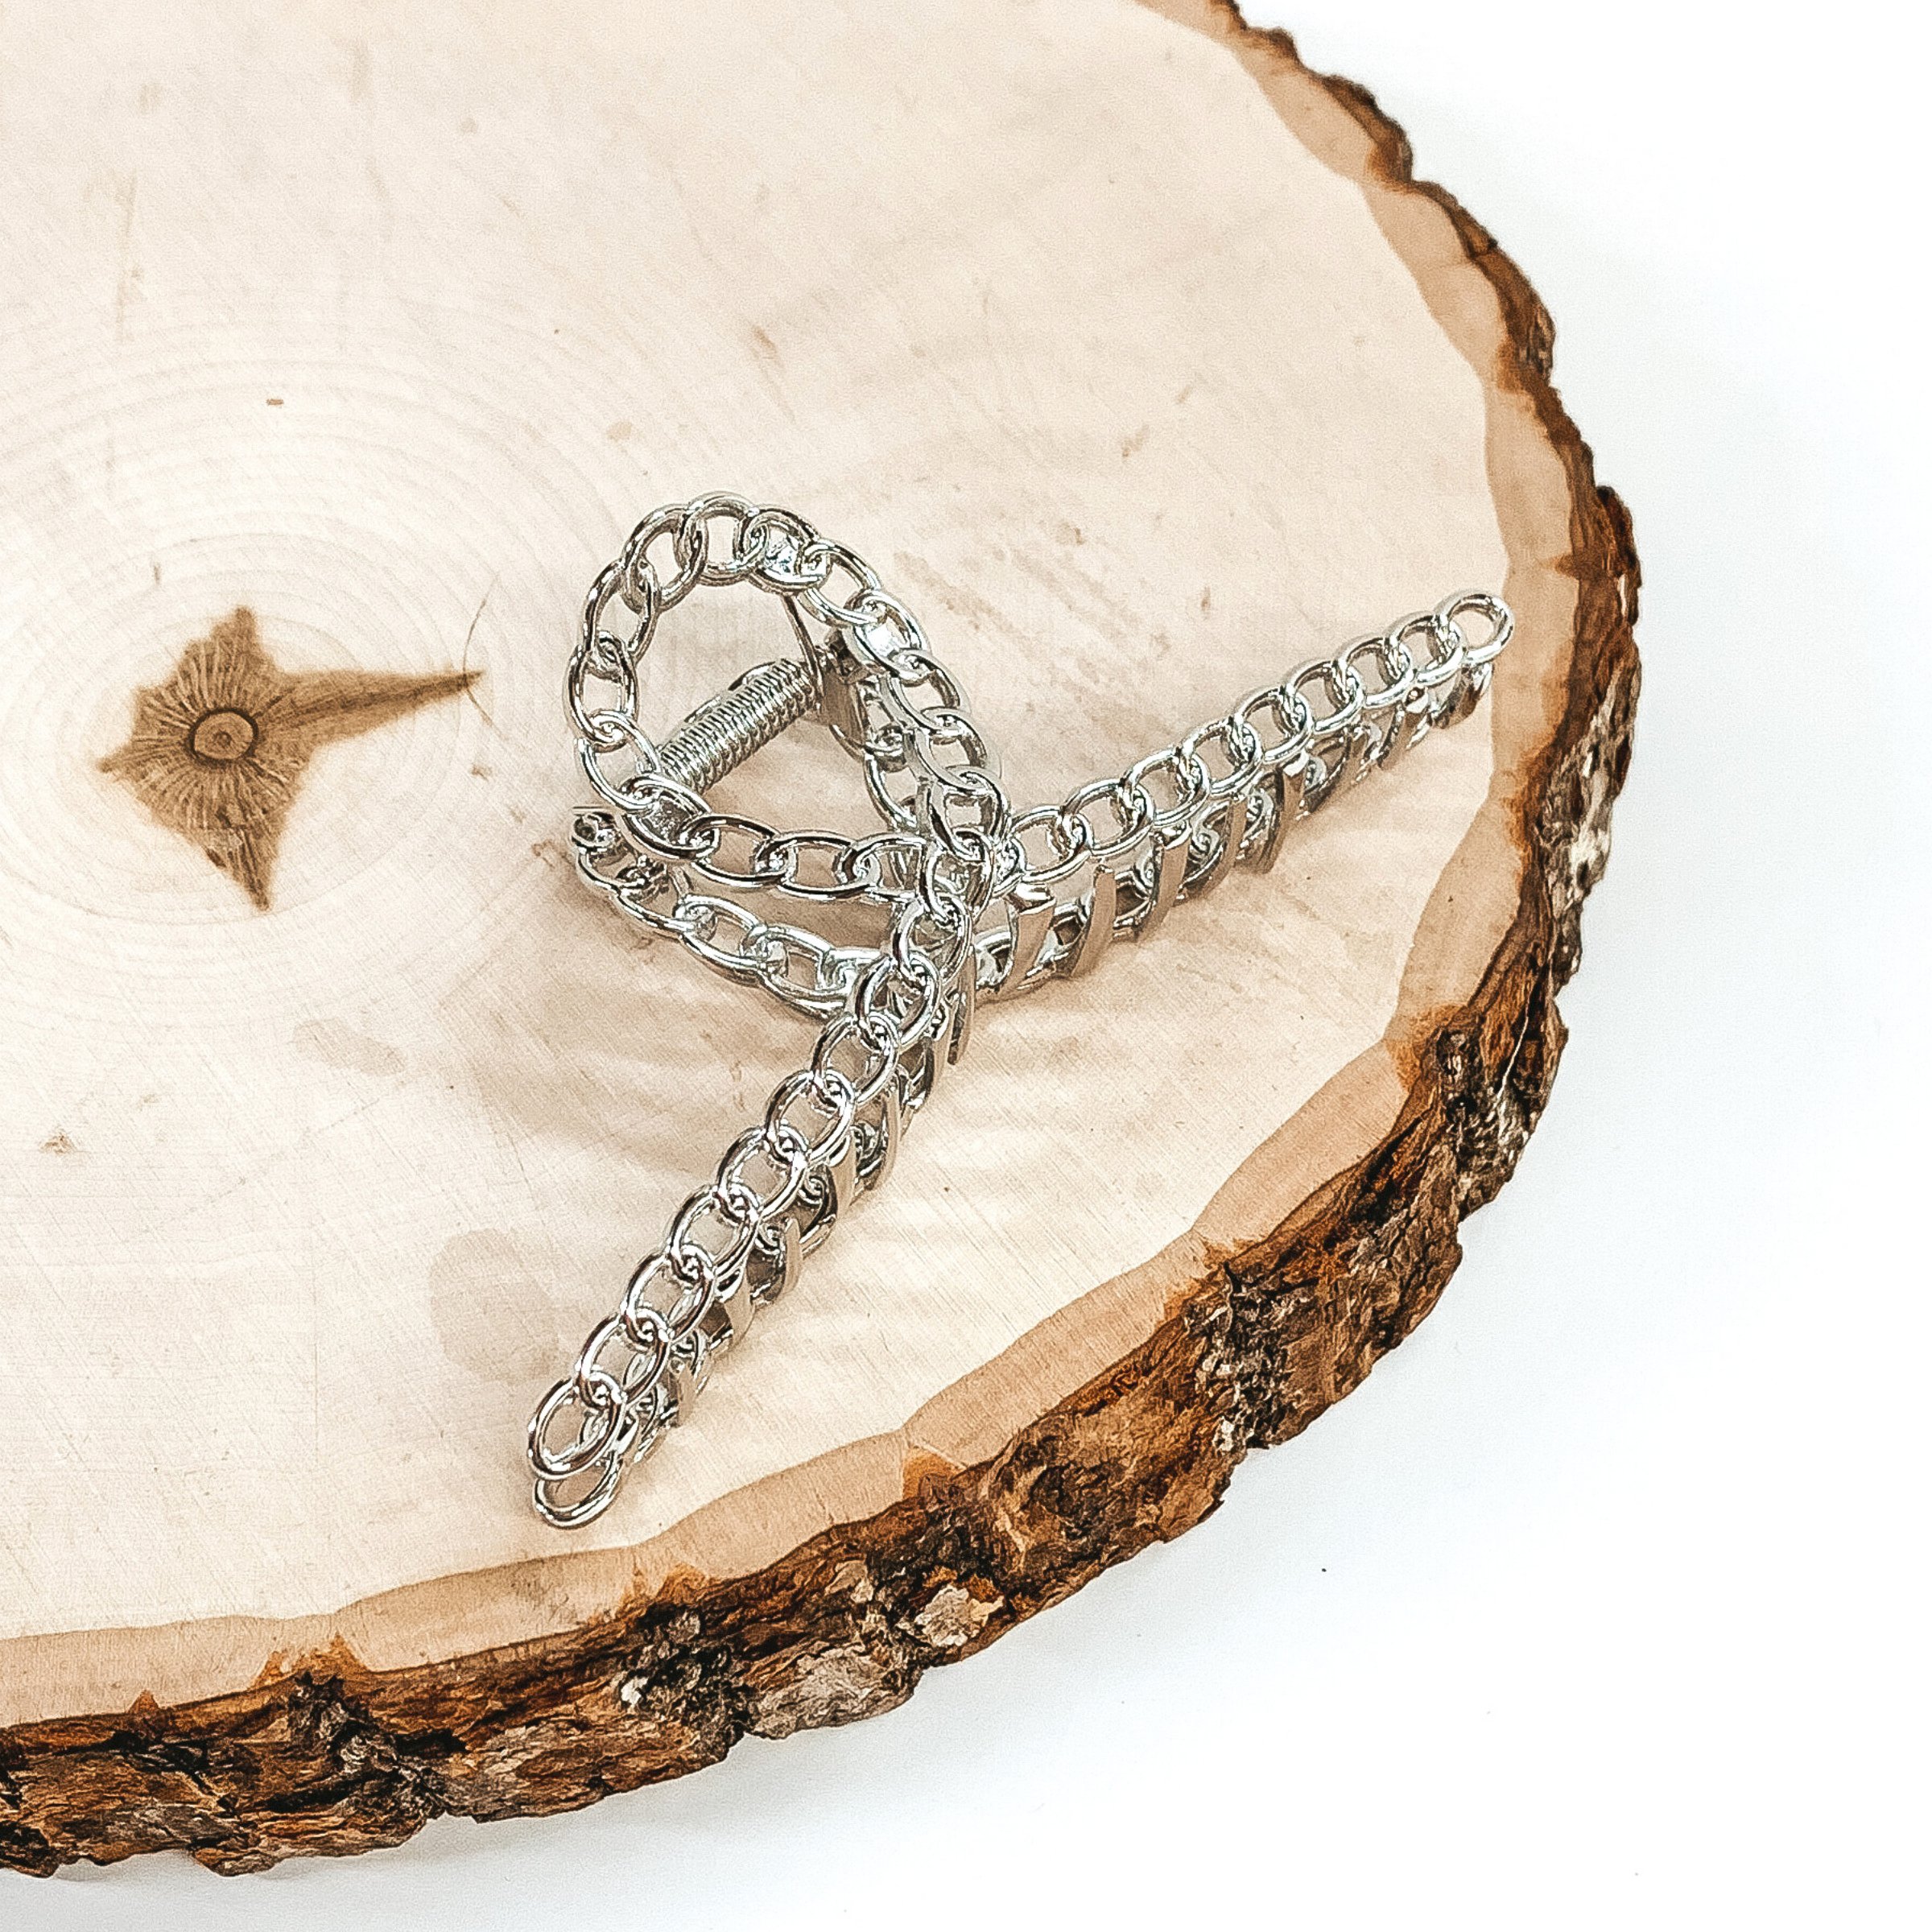 Shiny silver, chain linked clip. This clip is pictured laying on a piece of wood on a white background. 